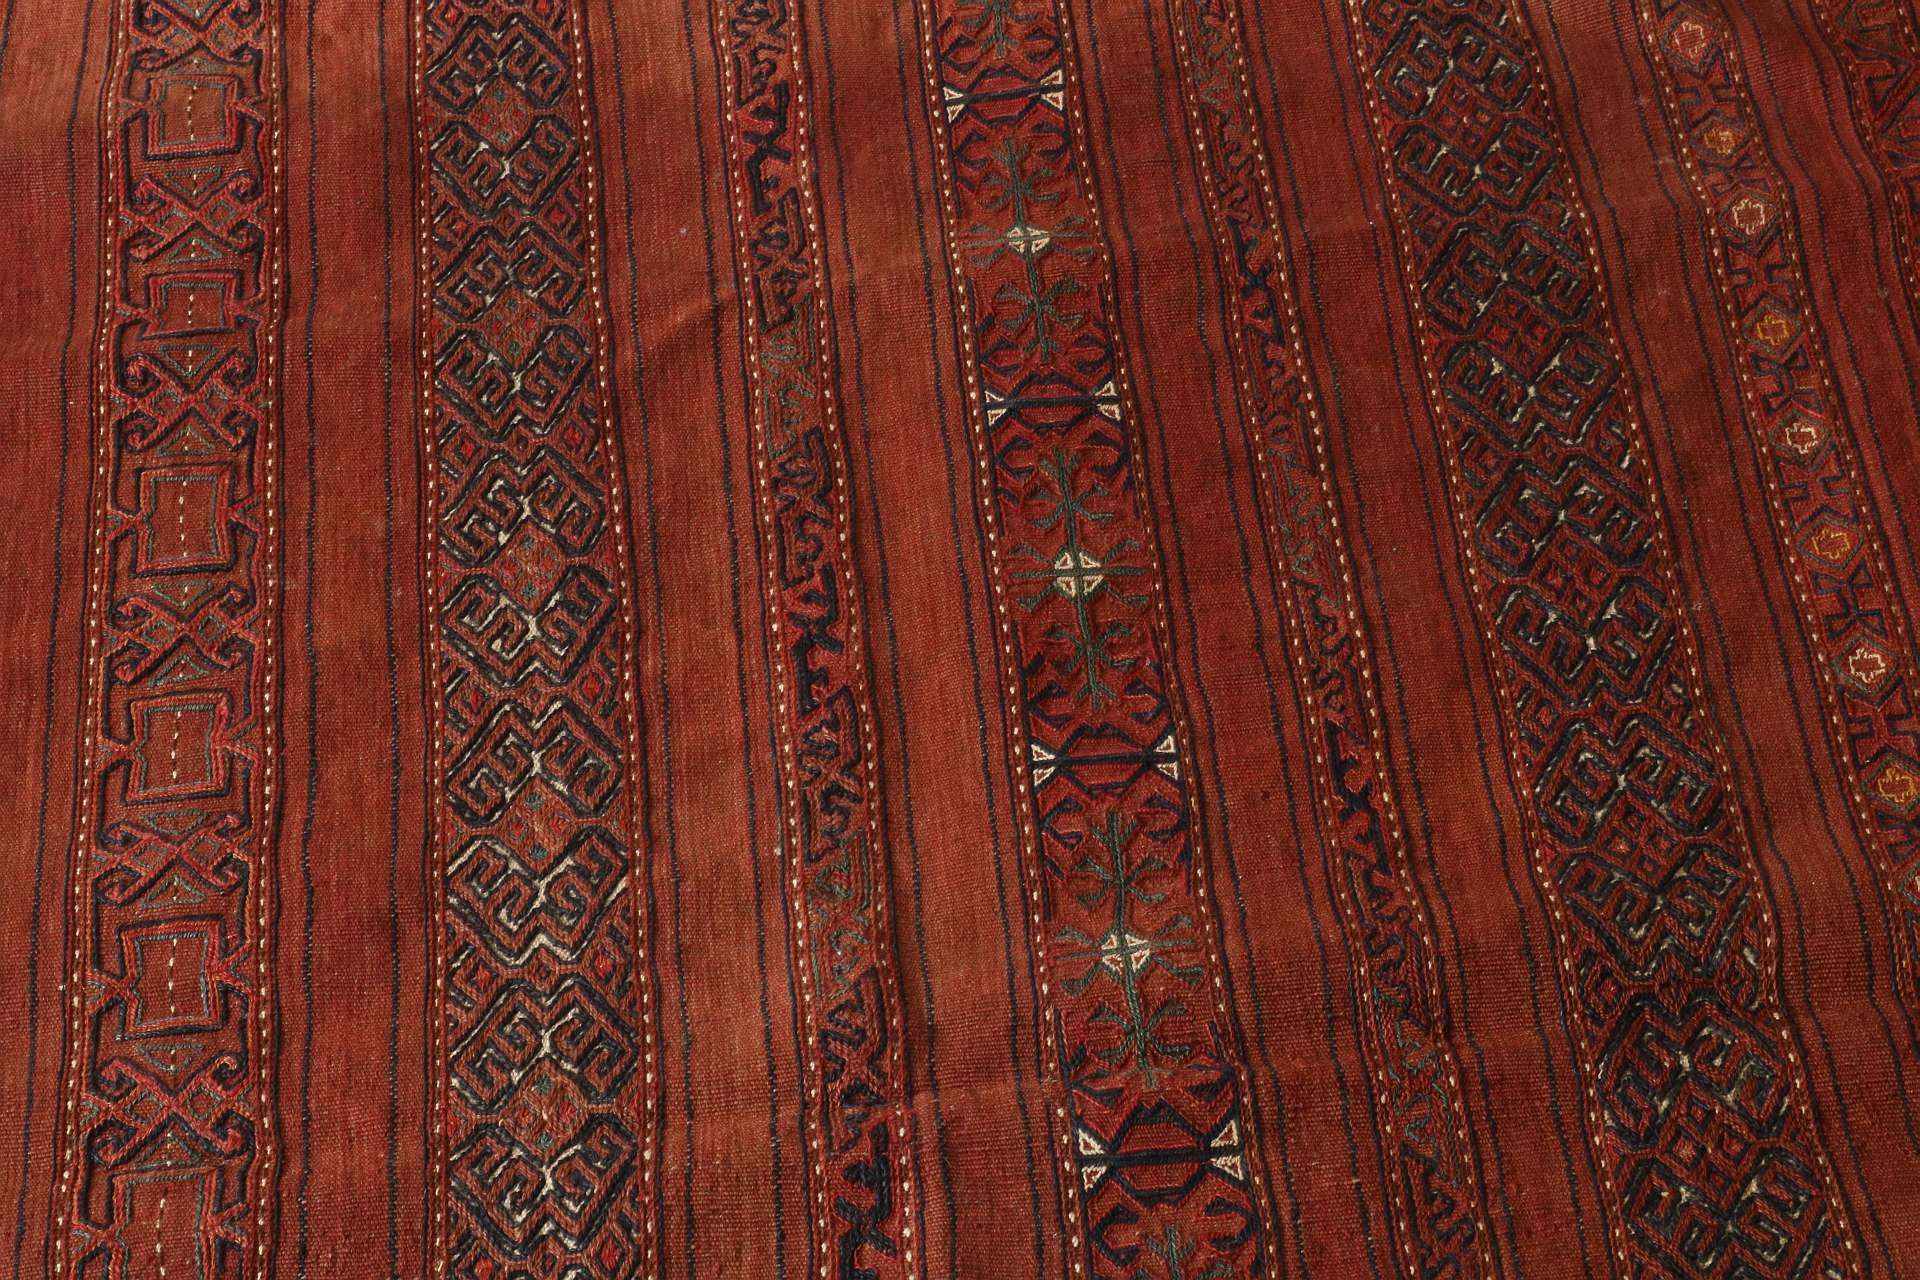 Dressing two Kilims - Image 4 of 5